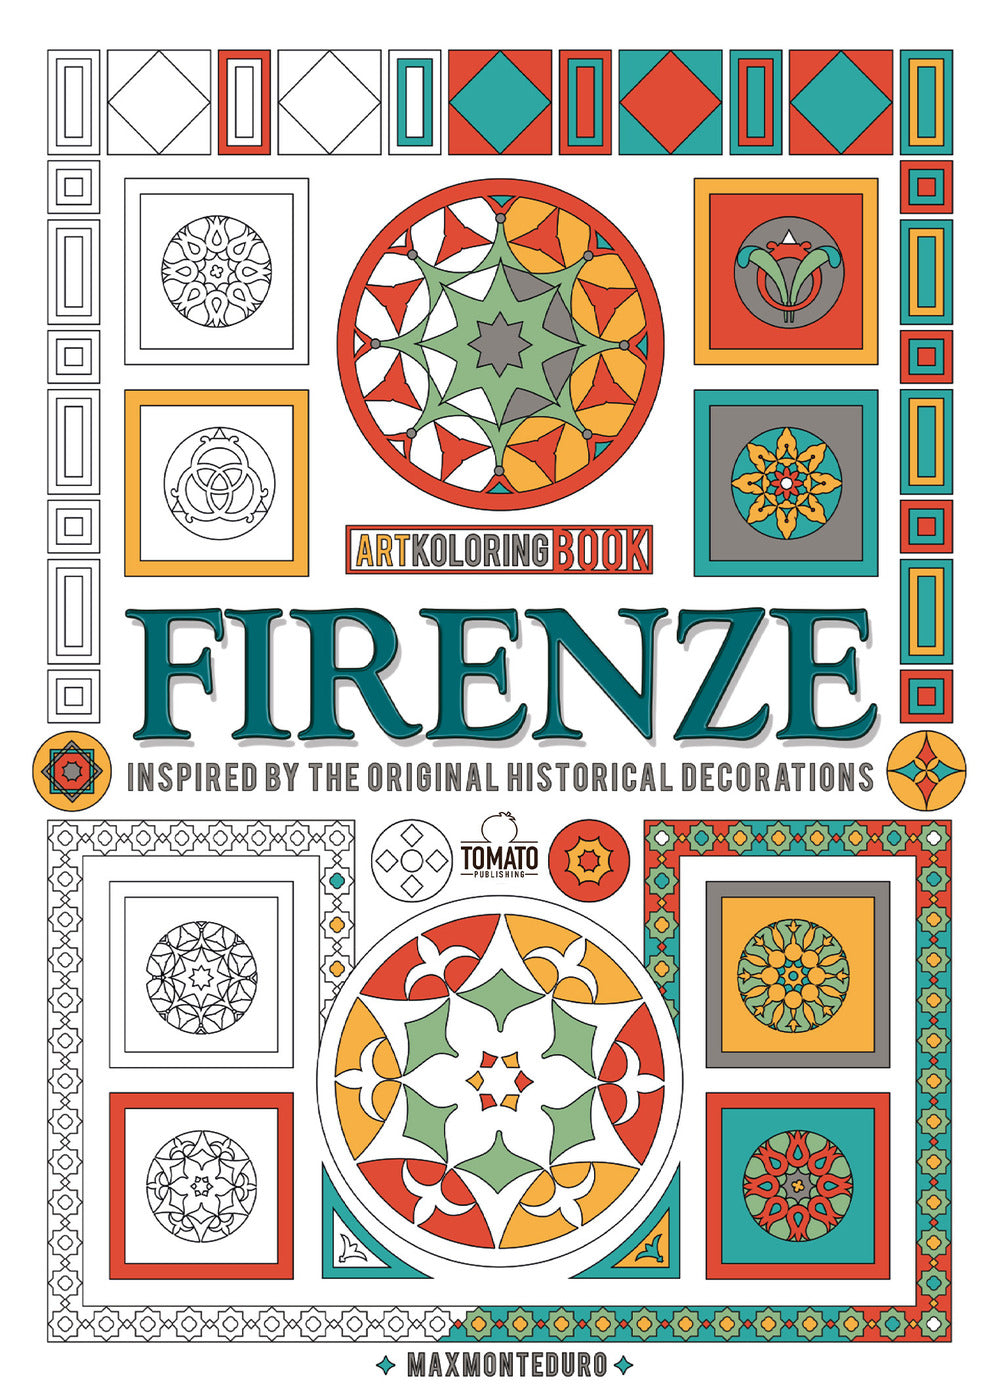 Firenze. Inspired by the original decorations. Artkoloring book